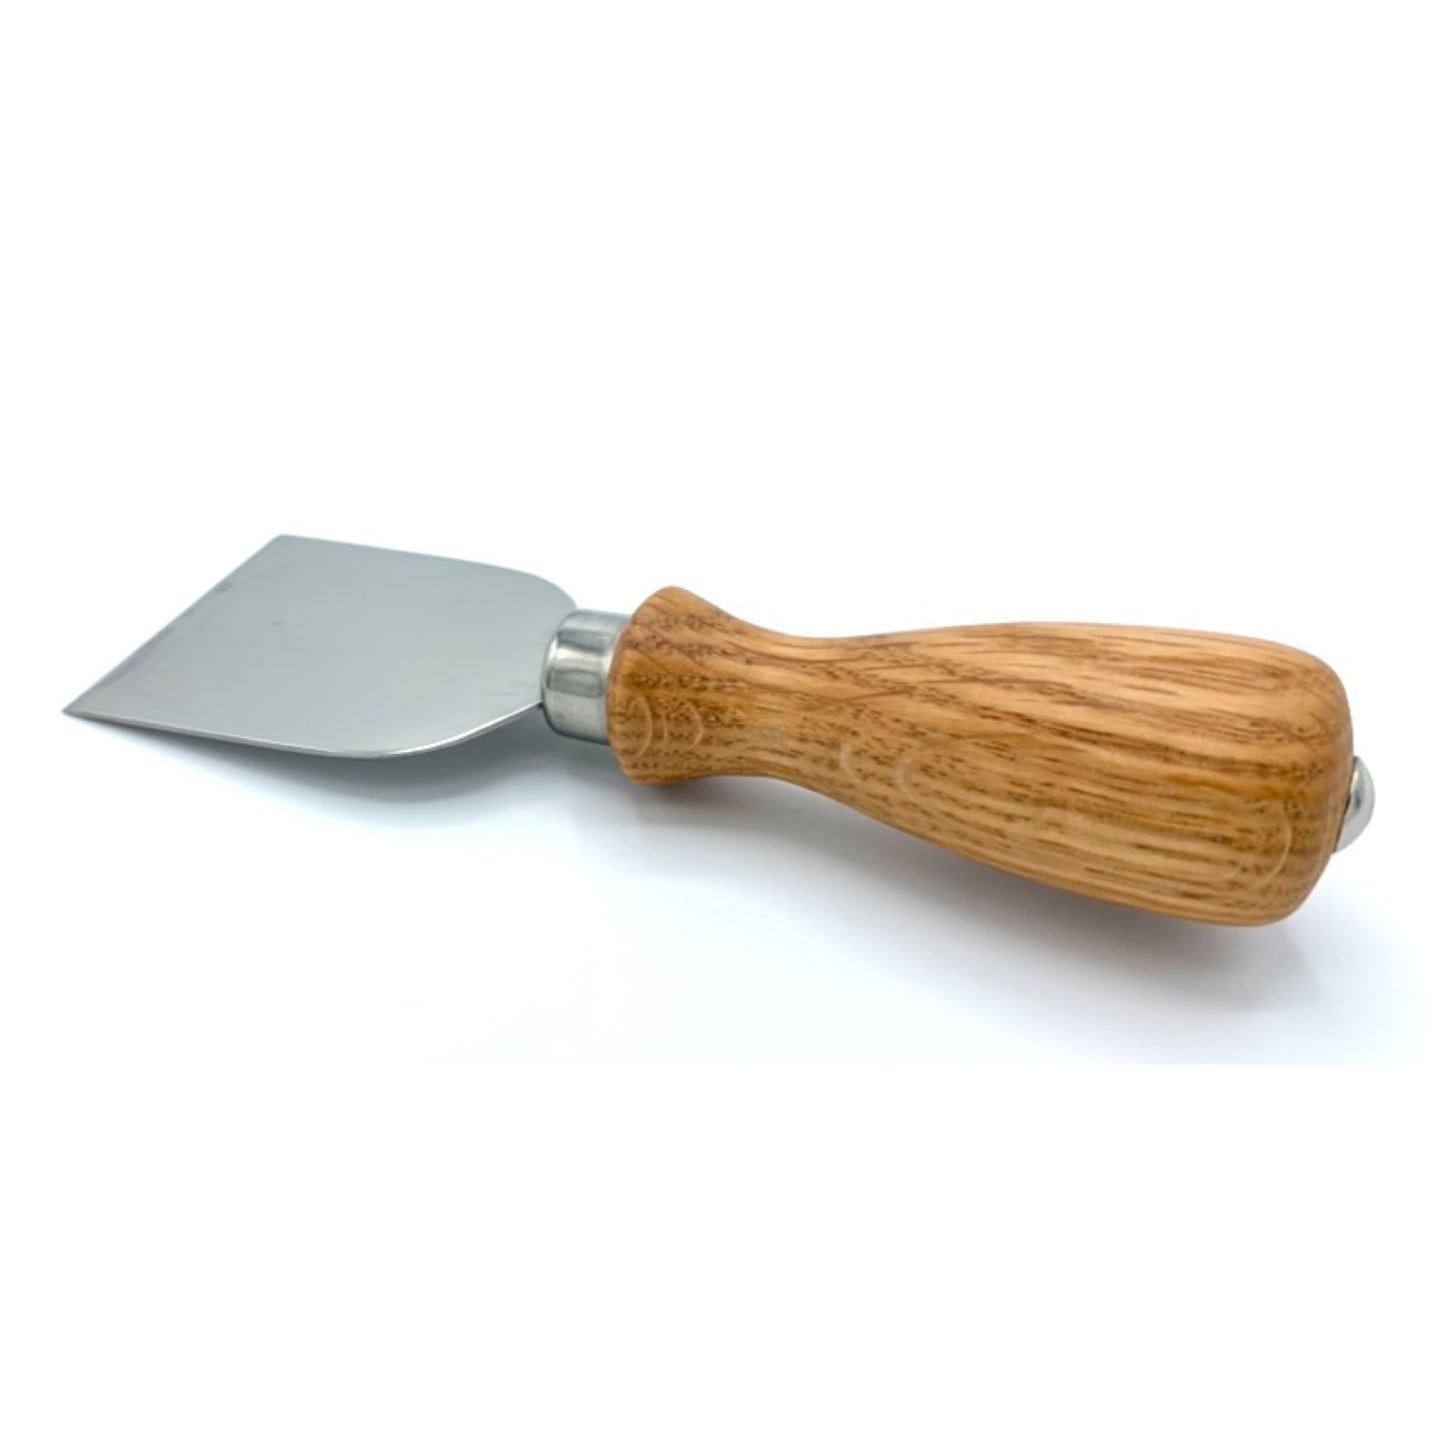 Hand-Turned artisan cheese knives: From the mild to the bold - Clines Crafted Woodworking LLC